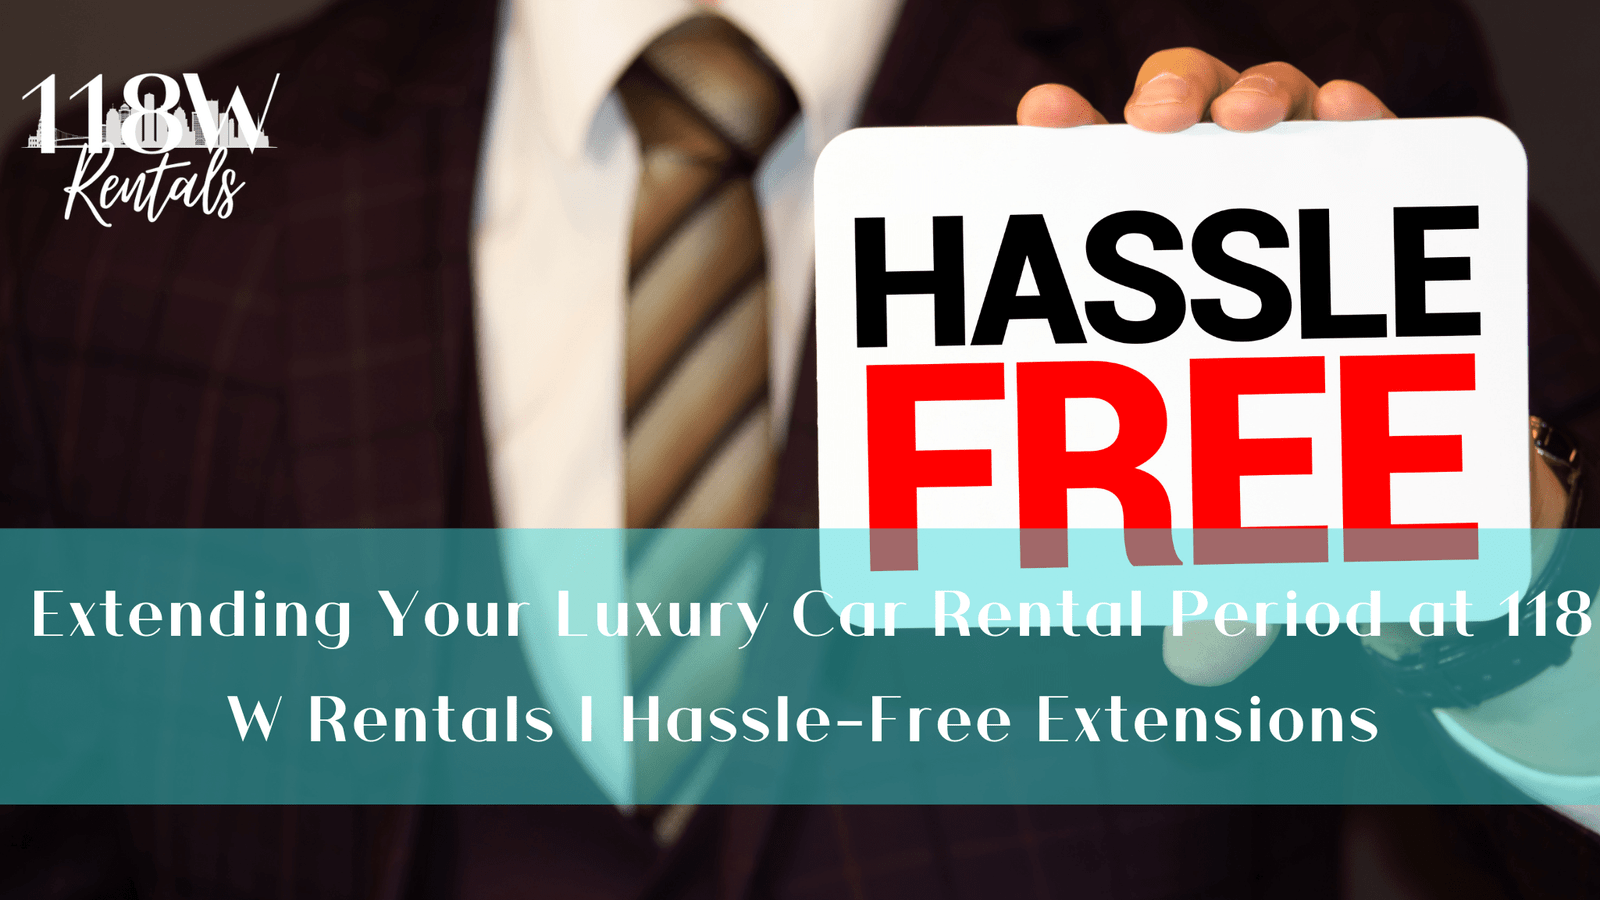 Extending Your Luxury Car Rental Period at 118 W Rentals | Hassle-Free Extensions